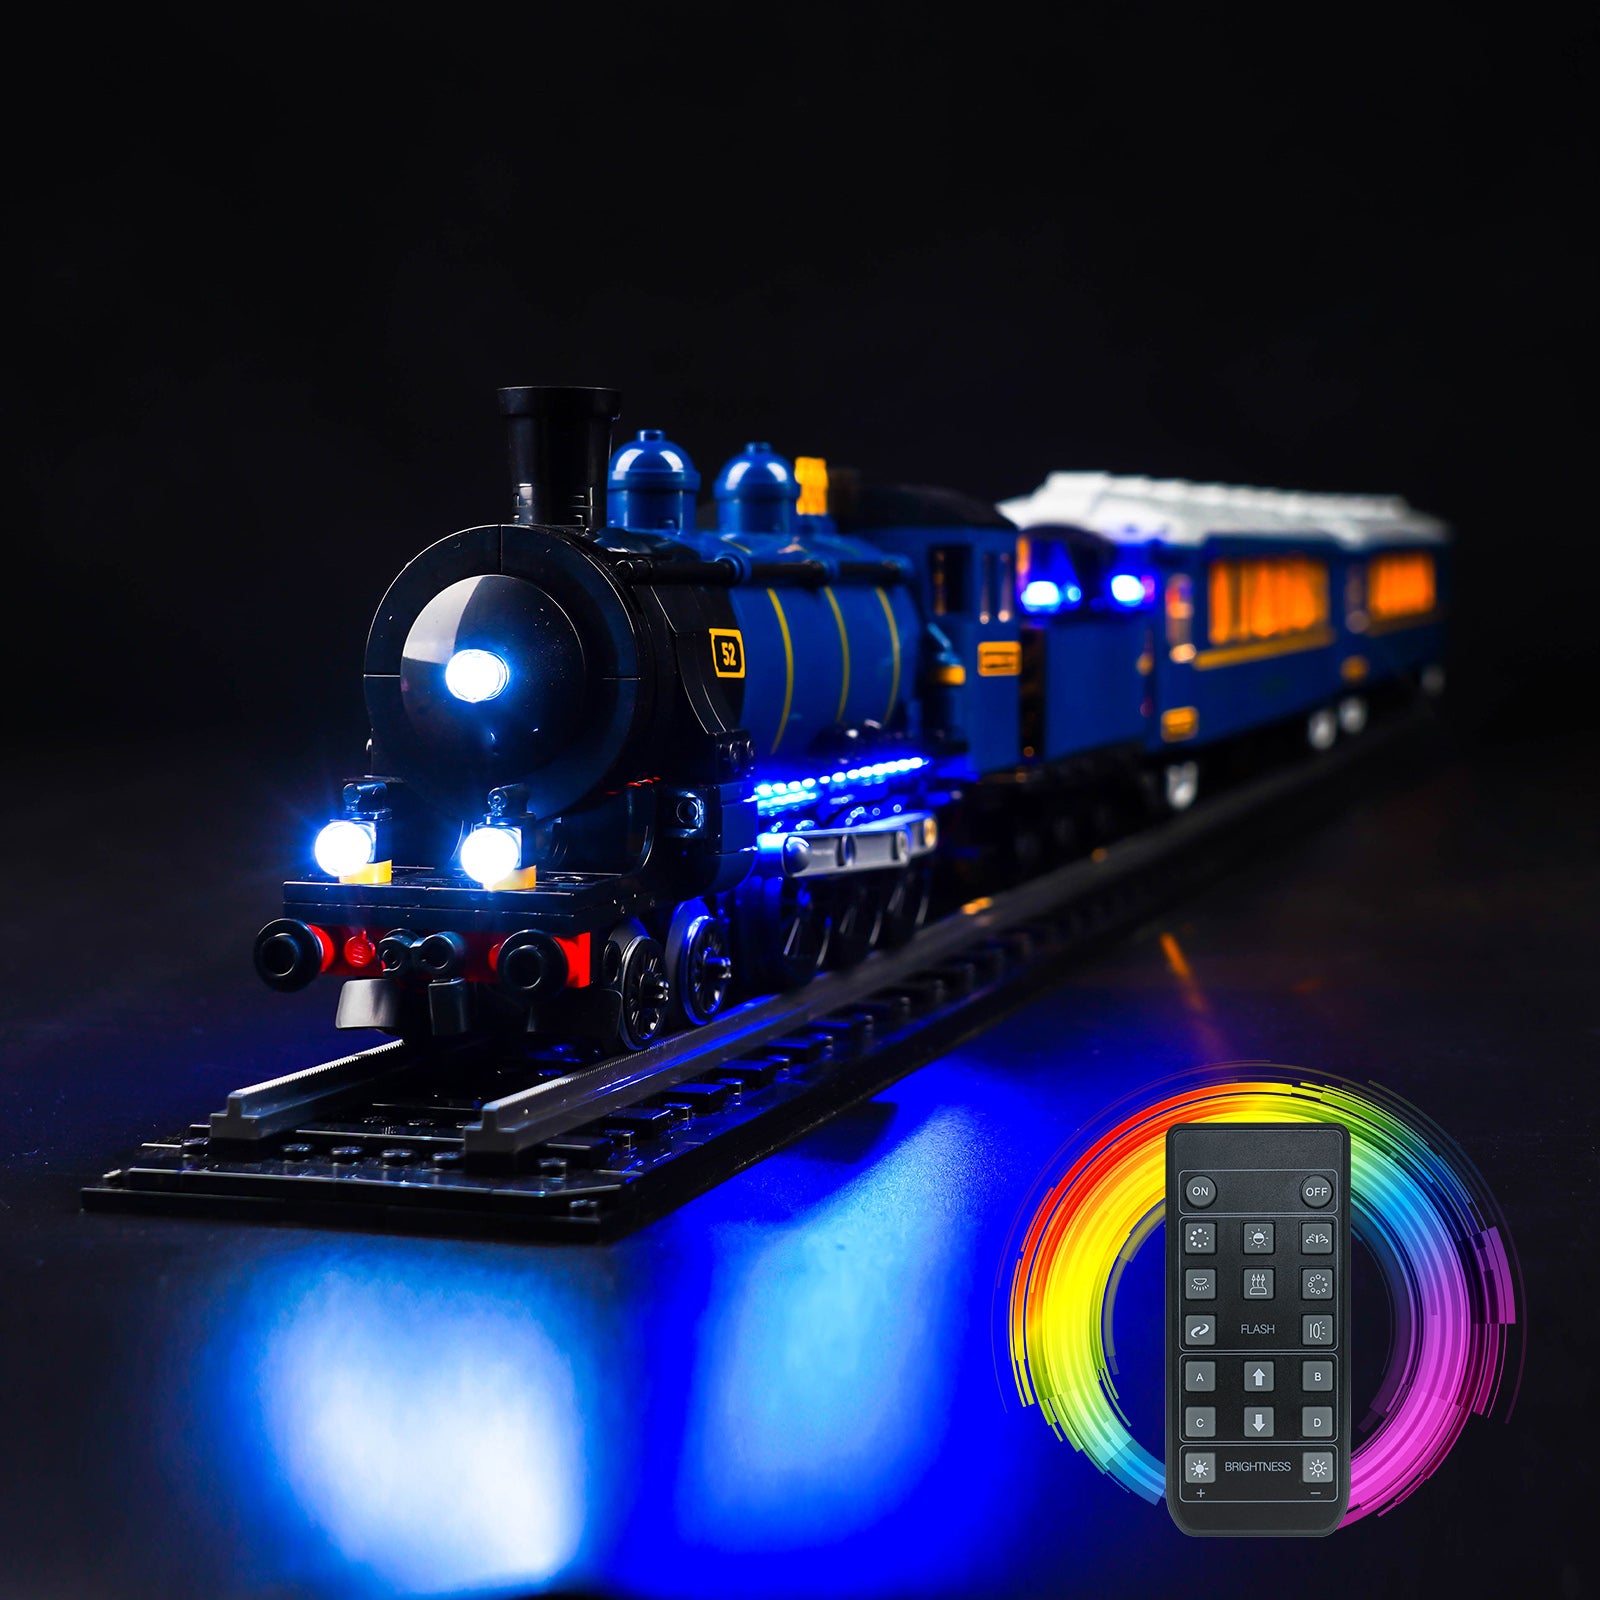 LED Light Kit for Lego 21344 The Orient Express Train, Remote Control Version Lighting, No Model Included